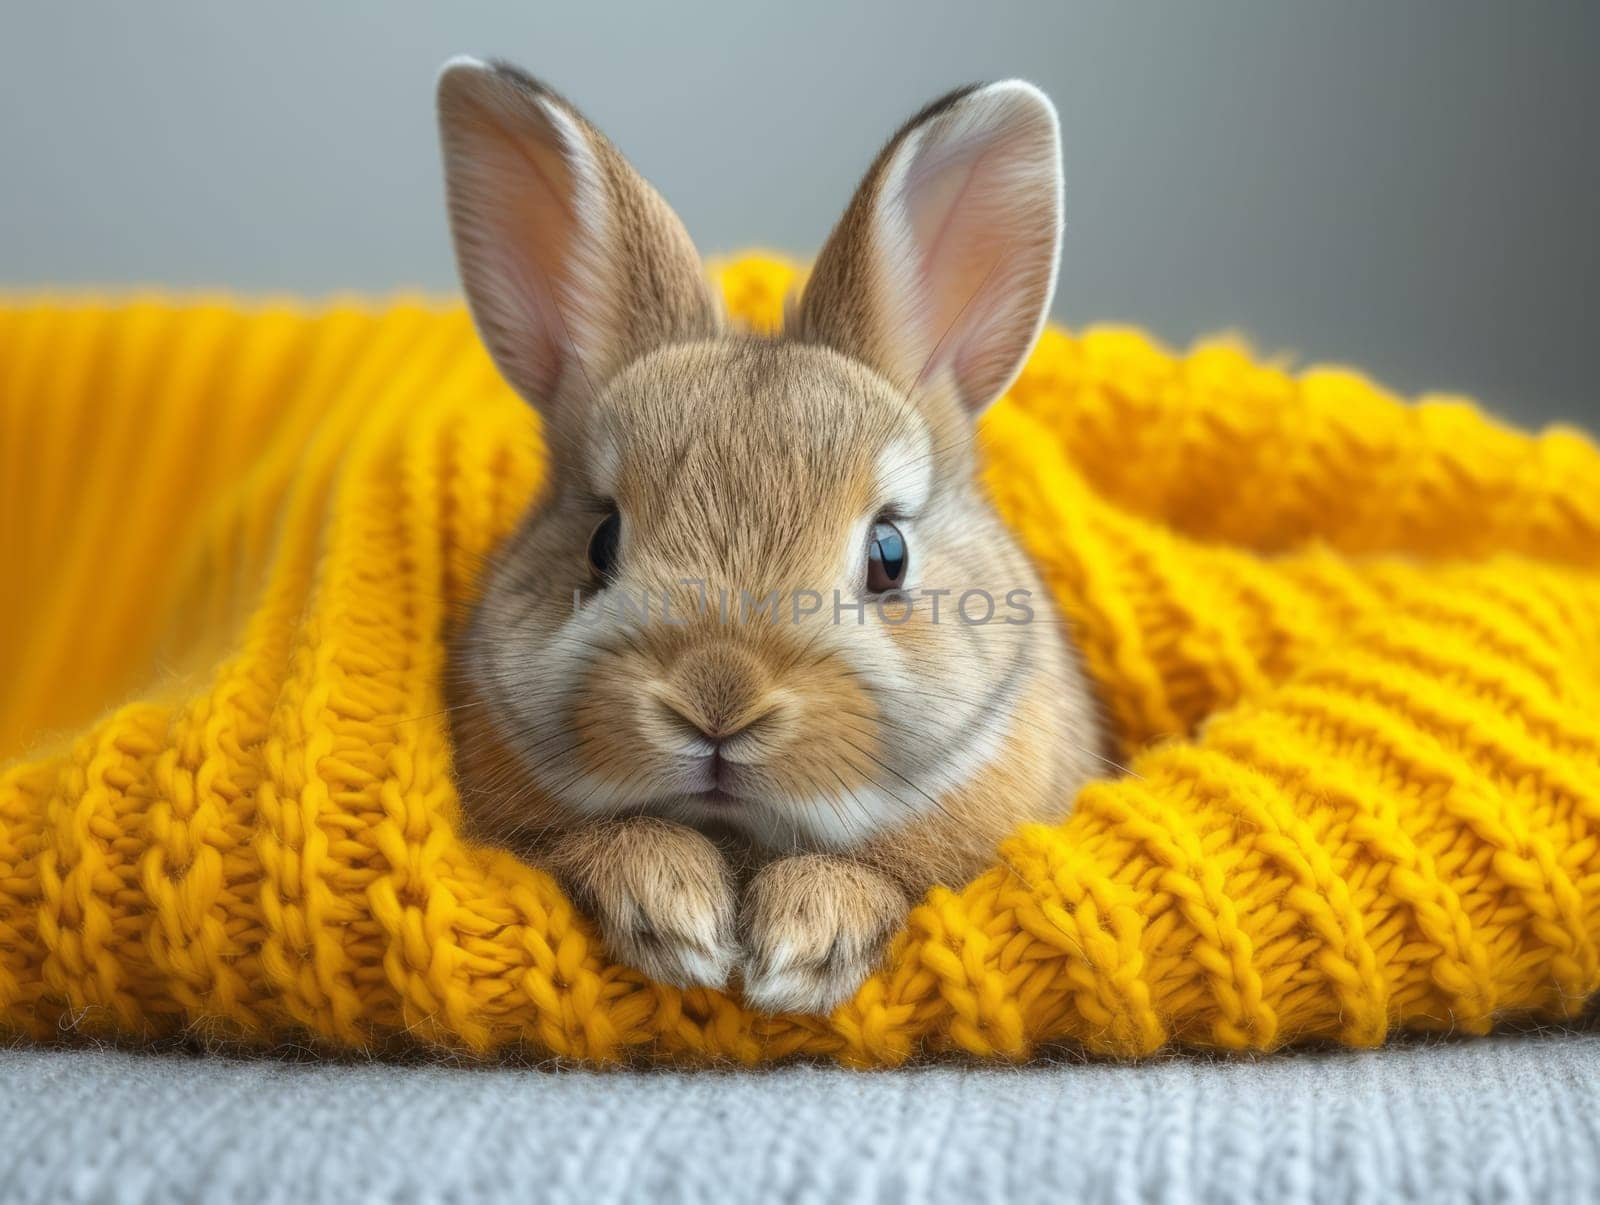 Cute Fluffy Easter Bunny in Yellow Blanket. Funny Rabbit Portrait.